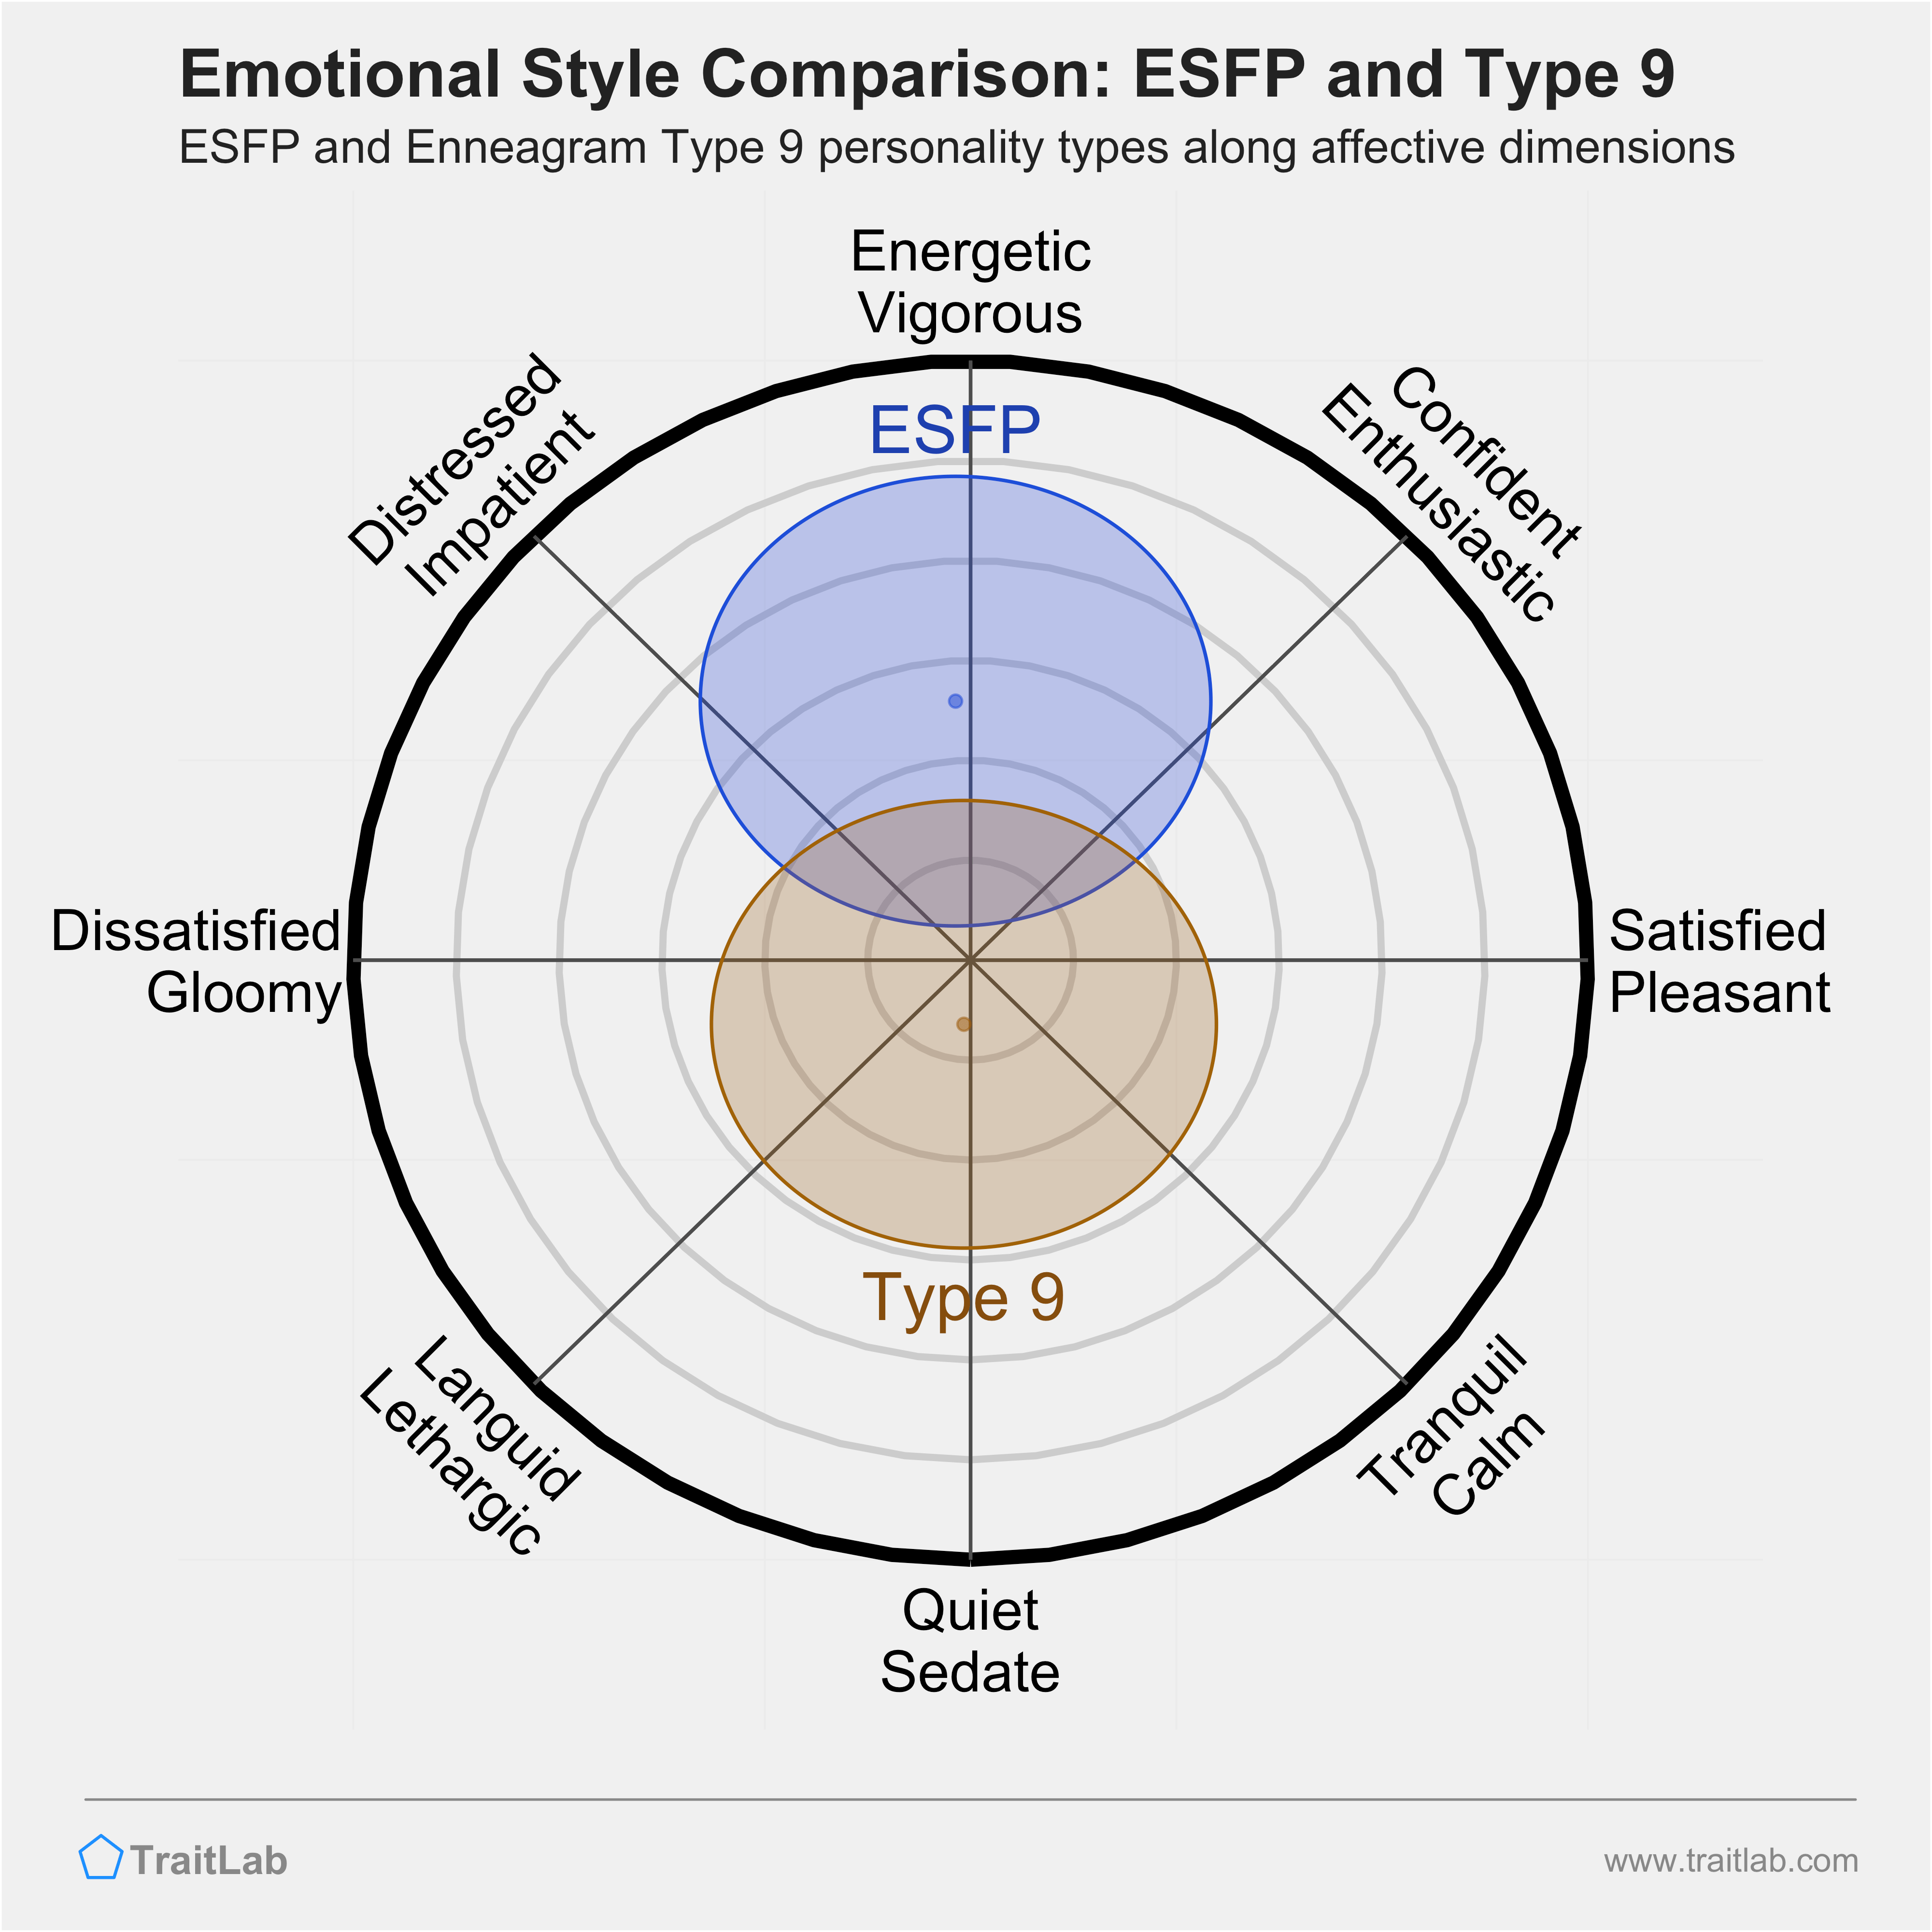 ESFP and Type 9 comparison across emotional (affective) dimensions